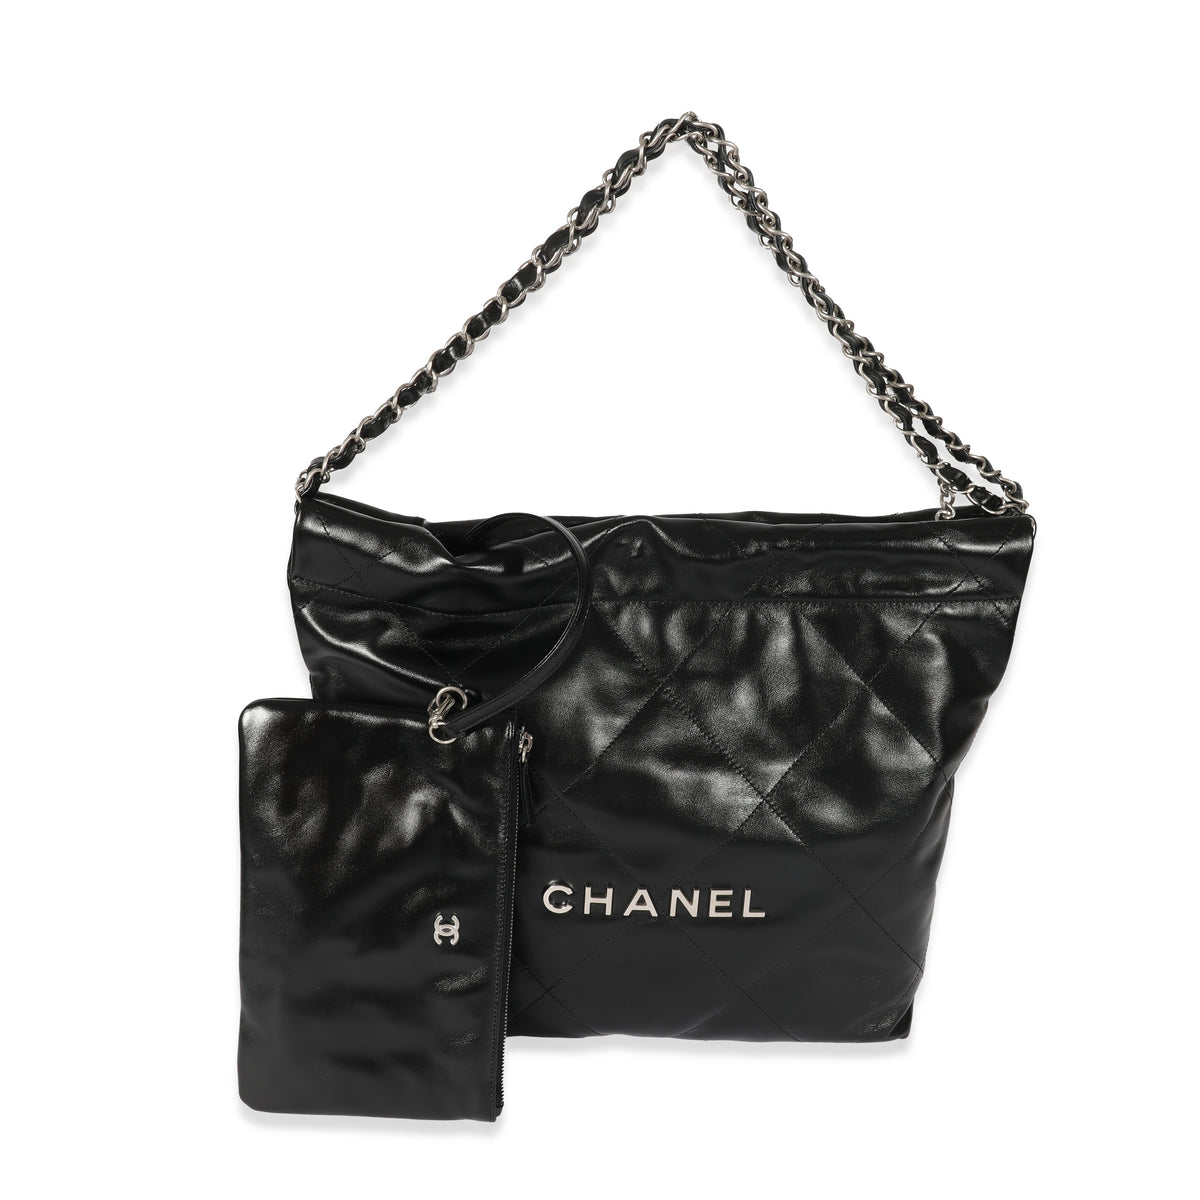 Chanel Black Quilted Shiny Calfskin Small Chanel 22 Bag, myGemma